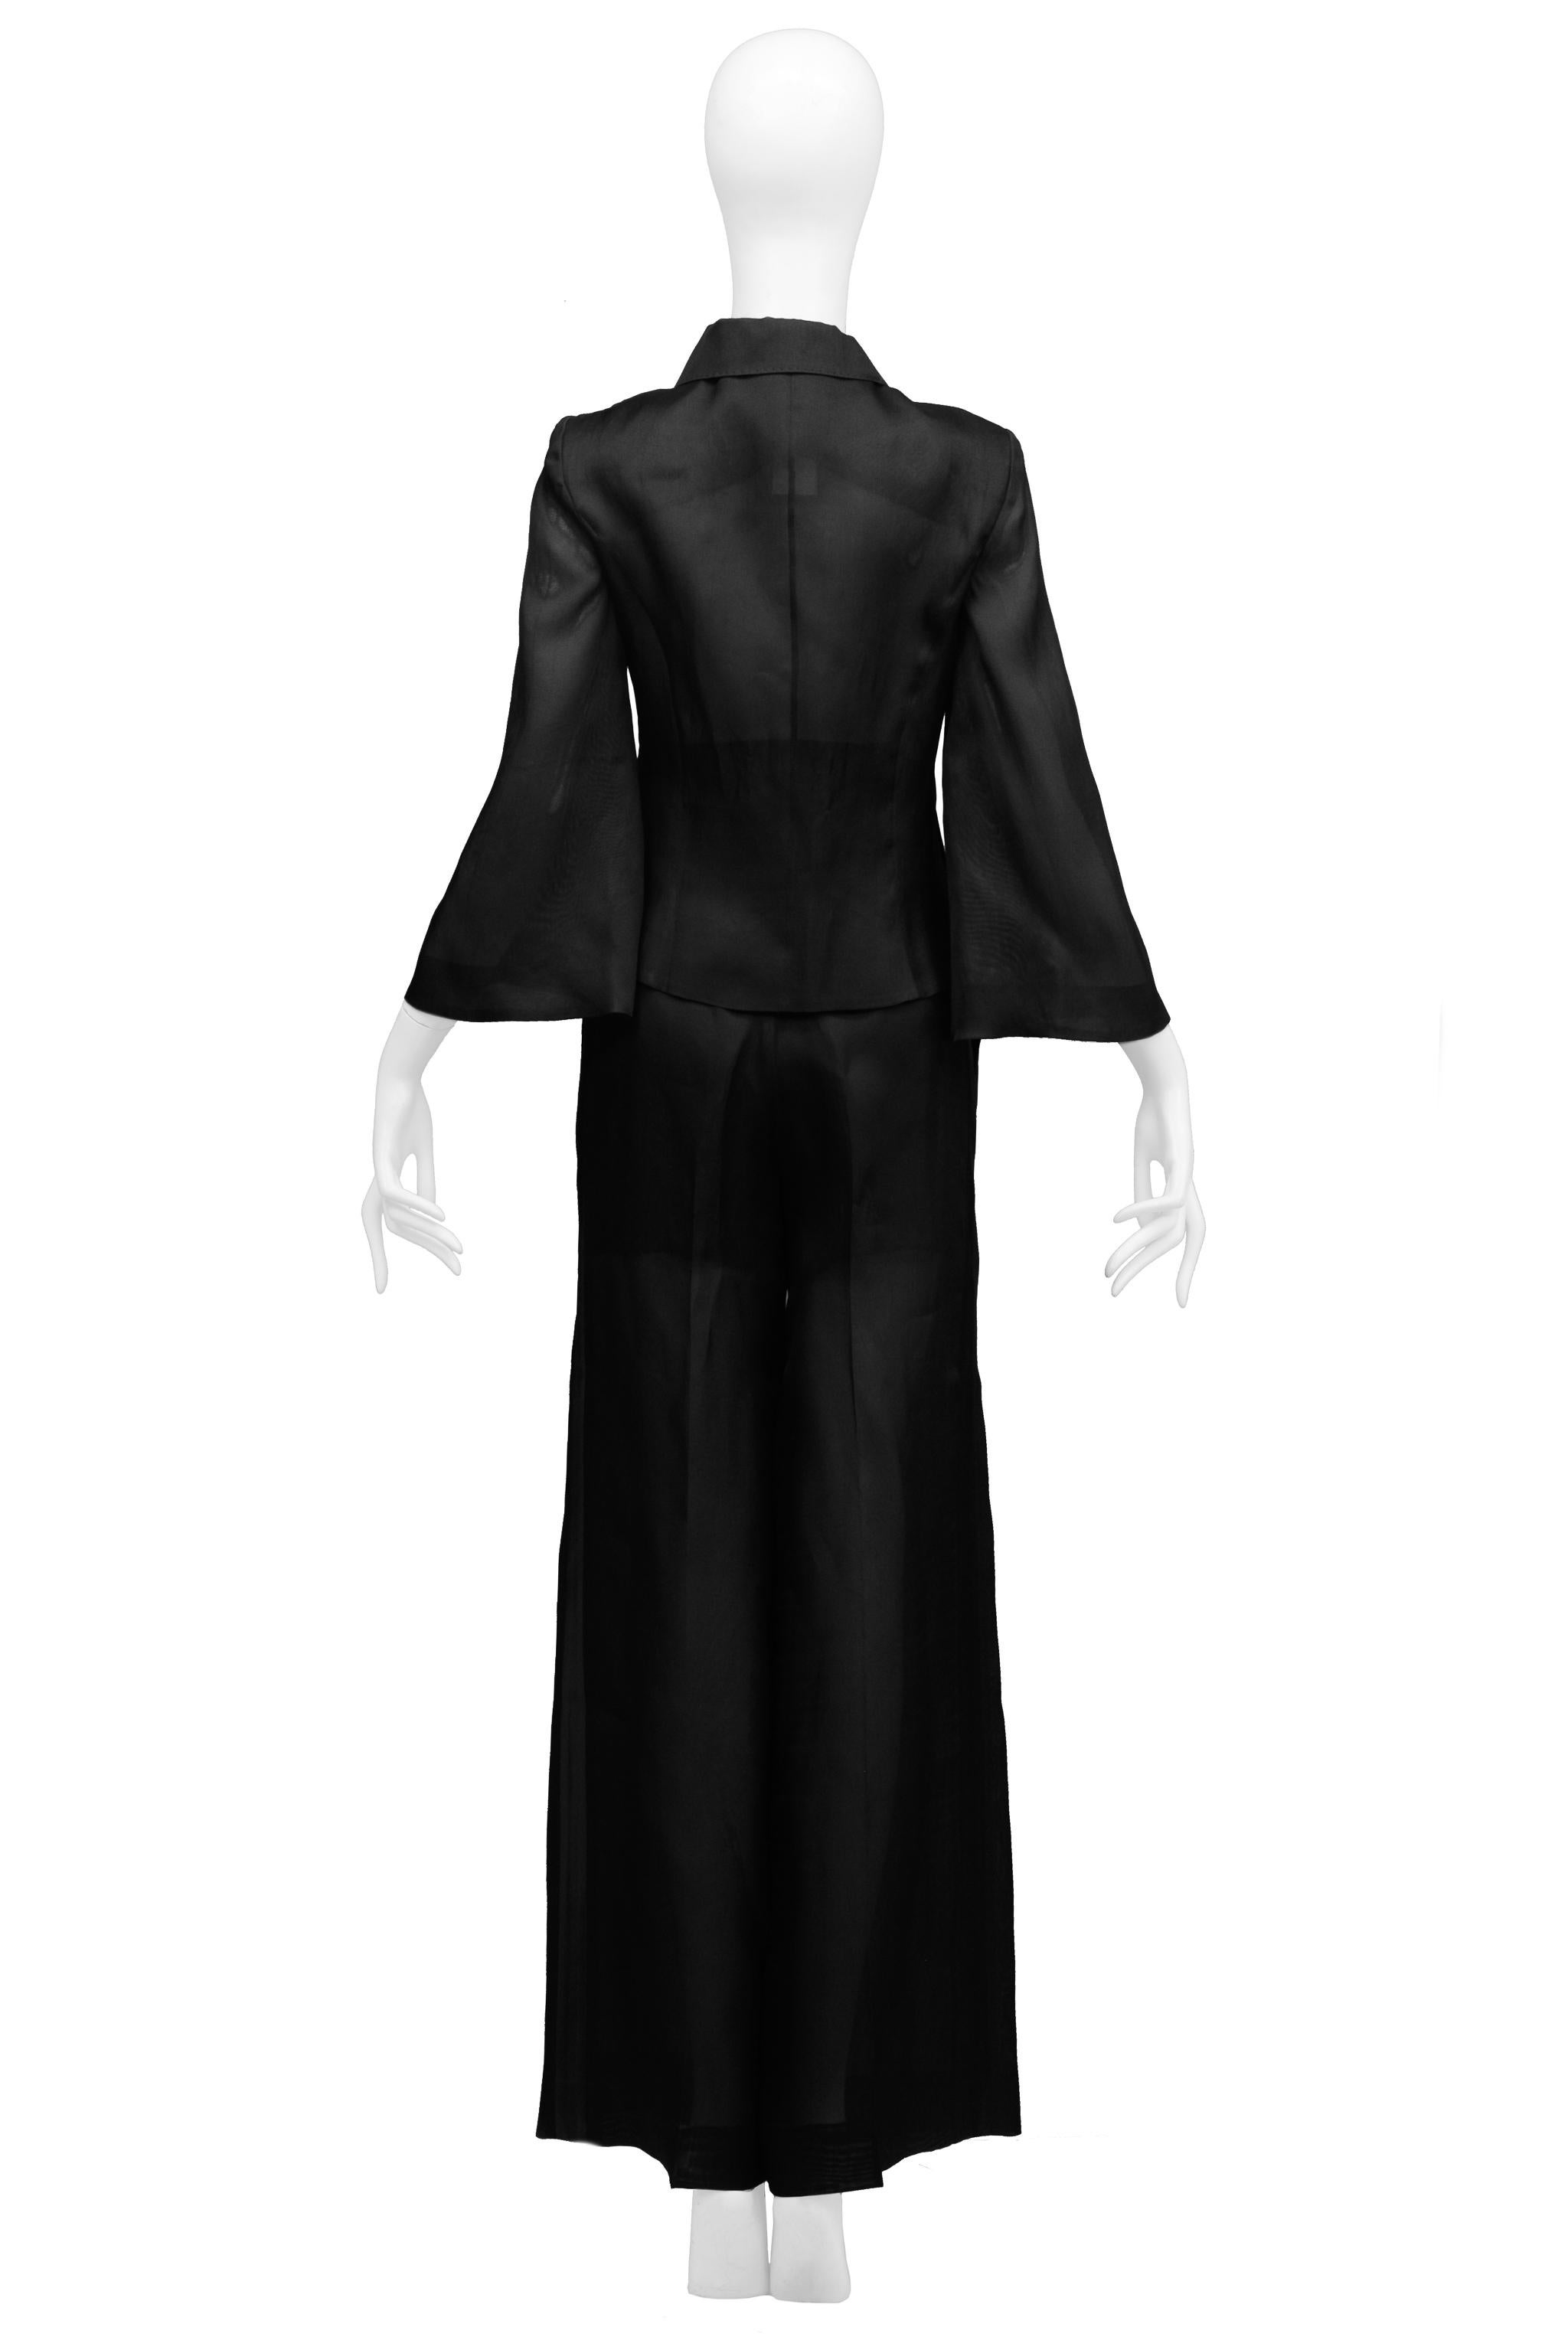 Gianfranco Ferre Black Sheer Pantsuit With Bell Sleeves For Sale 3